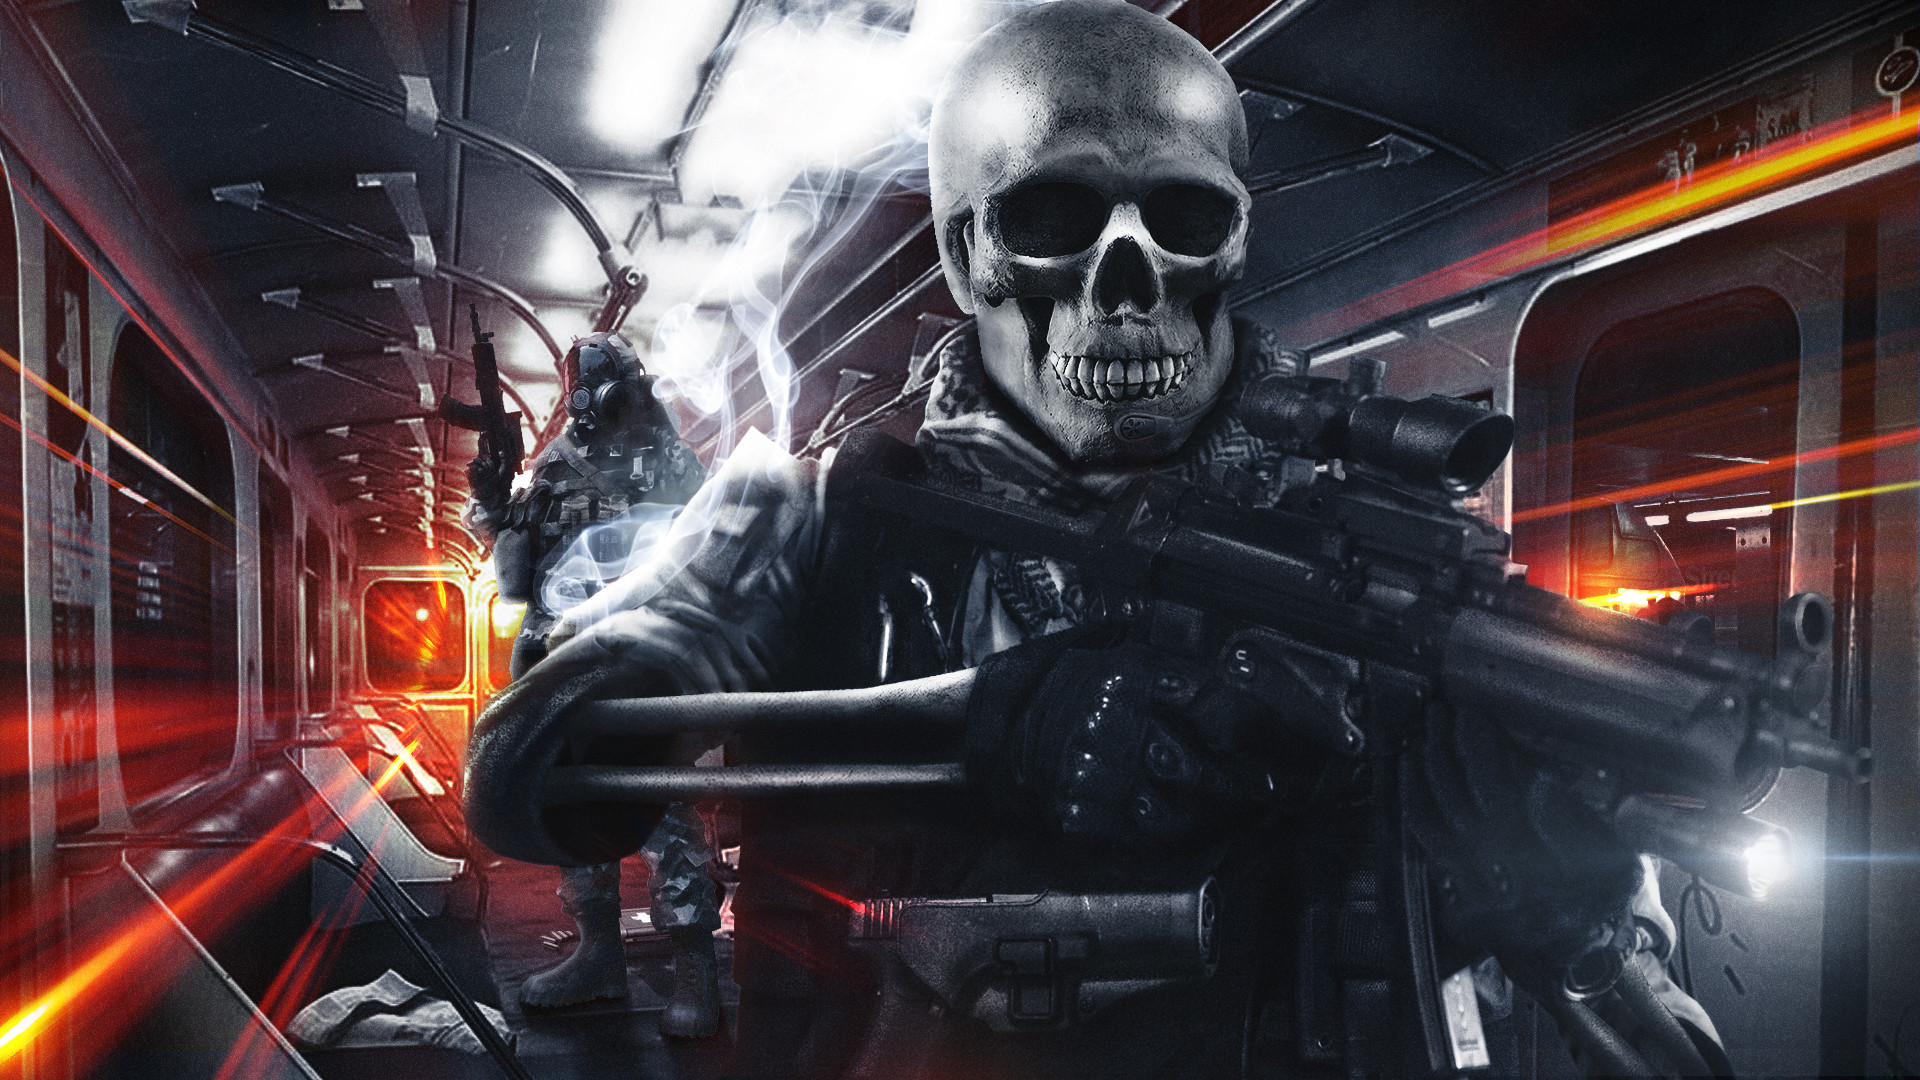 1920x1080 Army Soldier Skull Wallpaper 11530 Hd Wallpapers